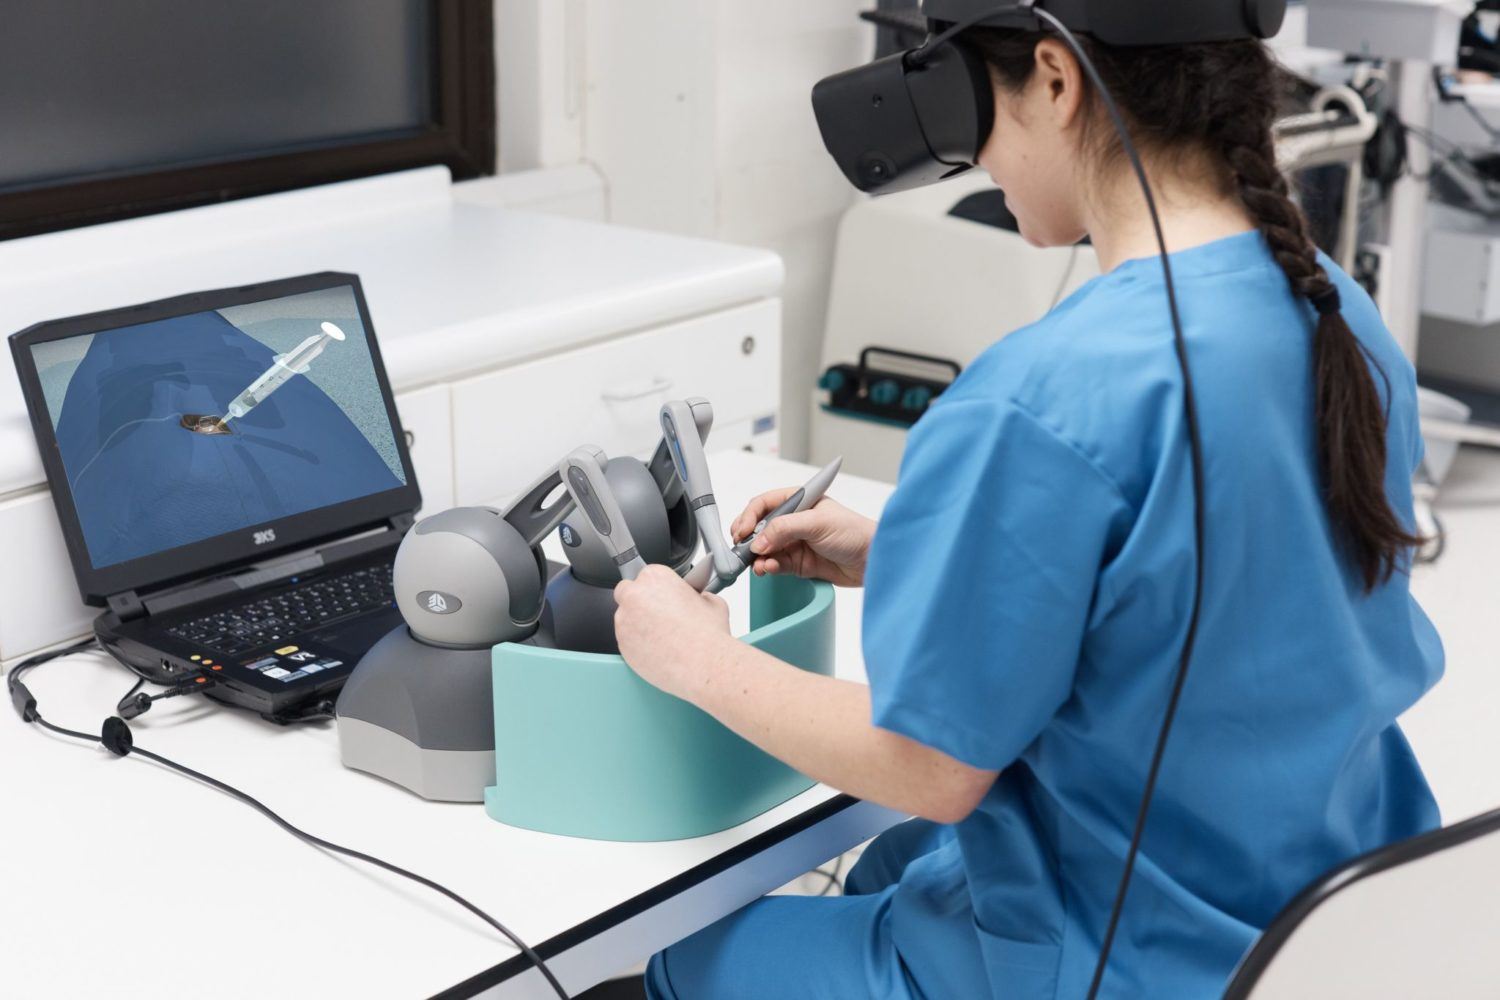 FundamentalVR Expands into VR Surgical Capabilities to Ophthalmology